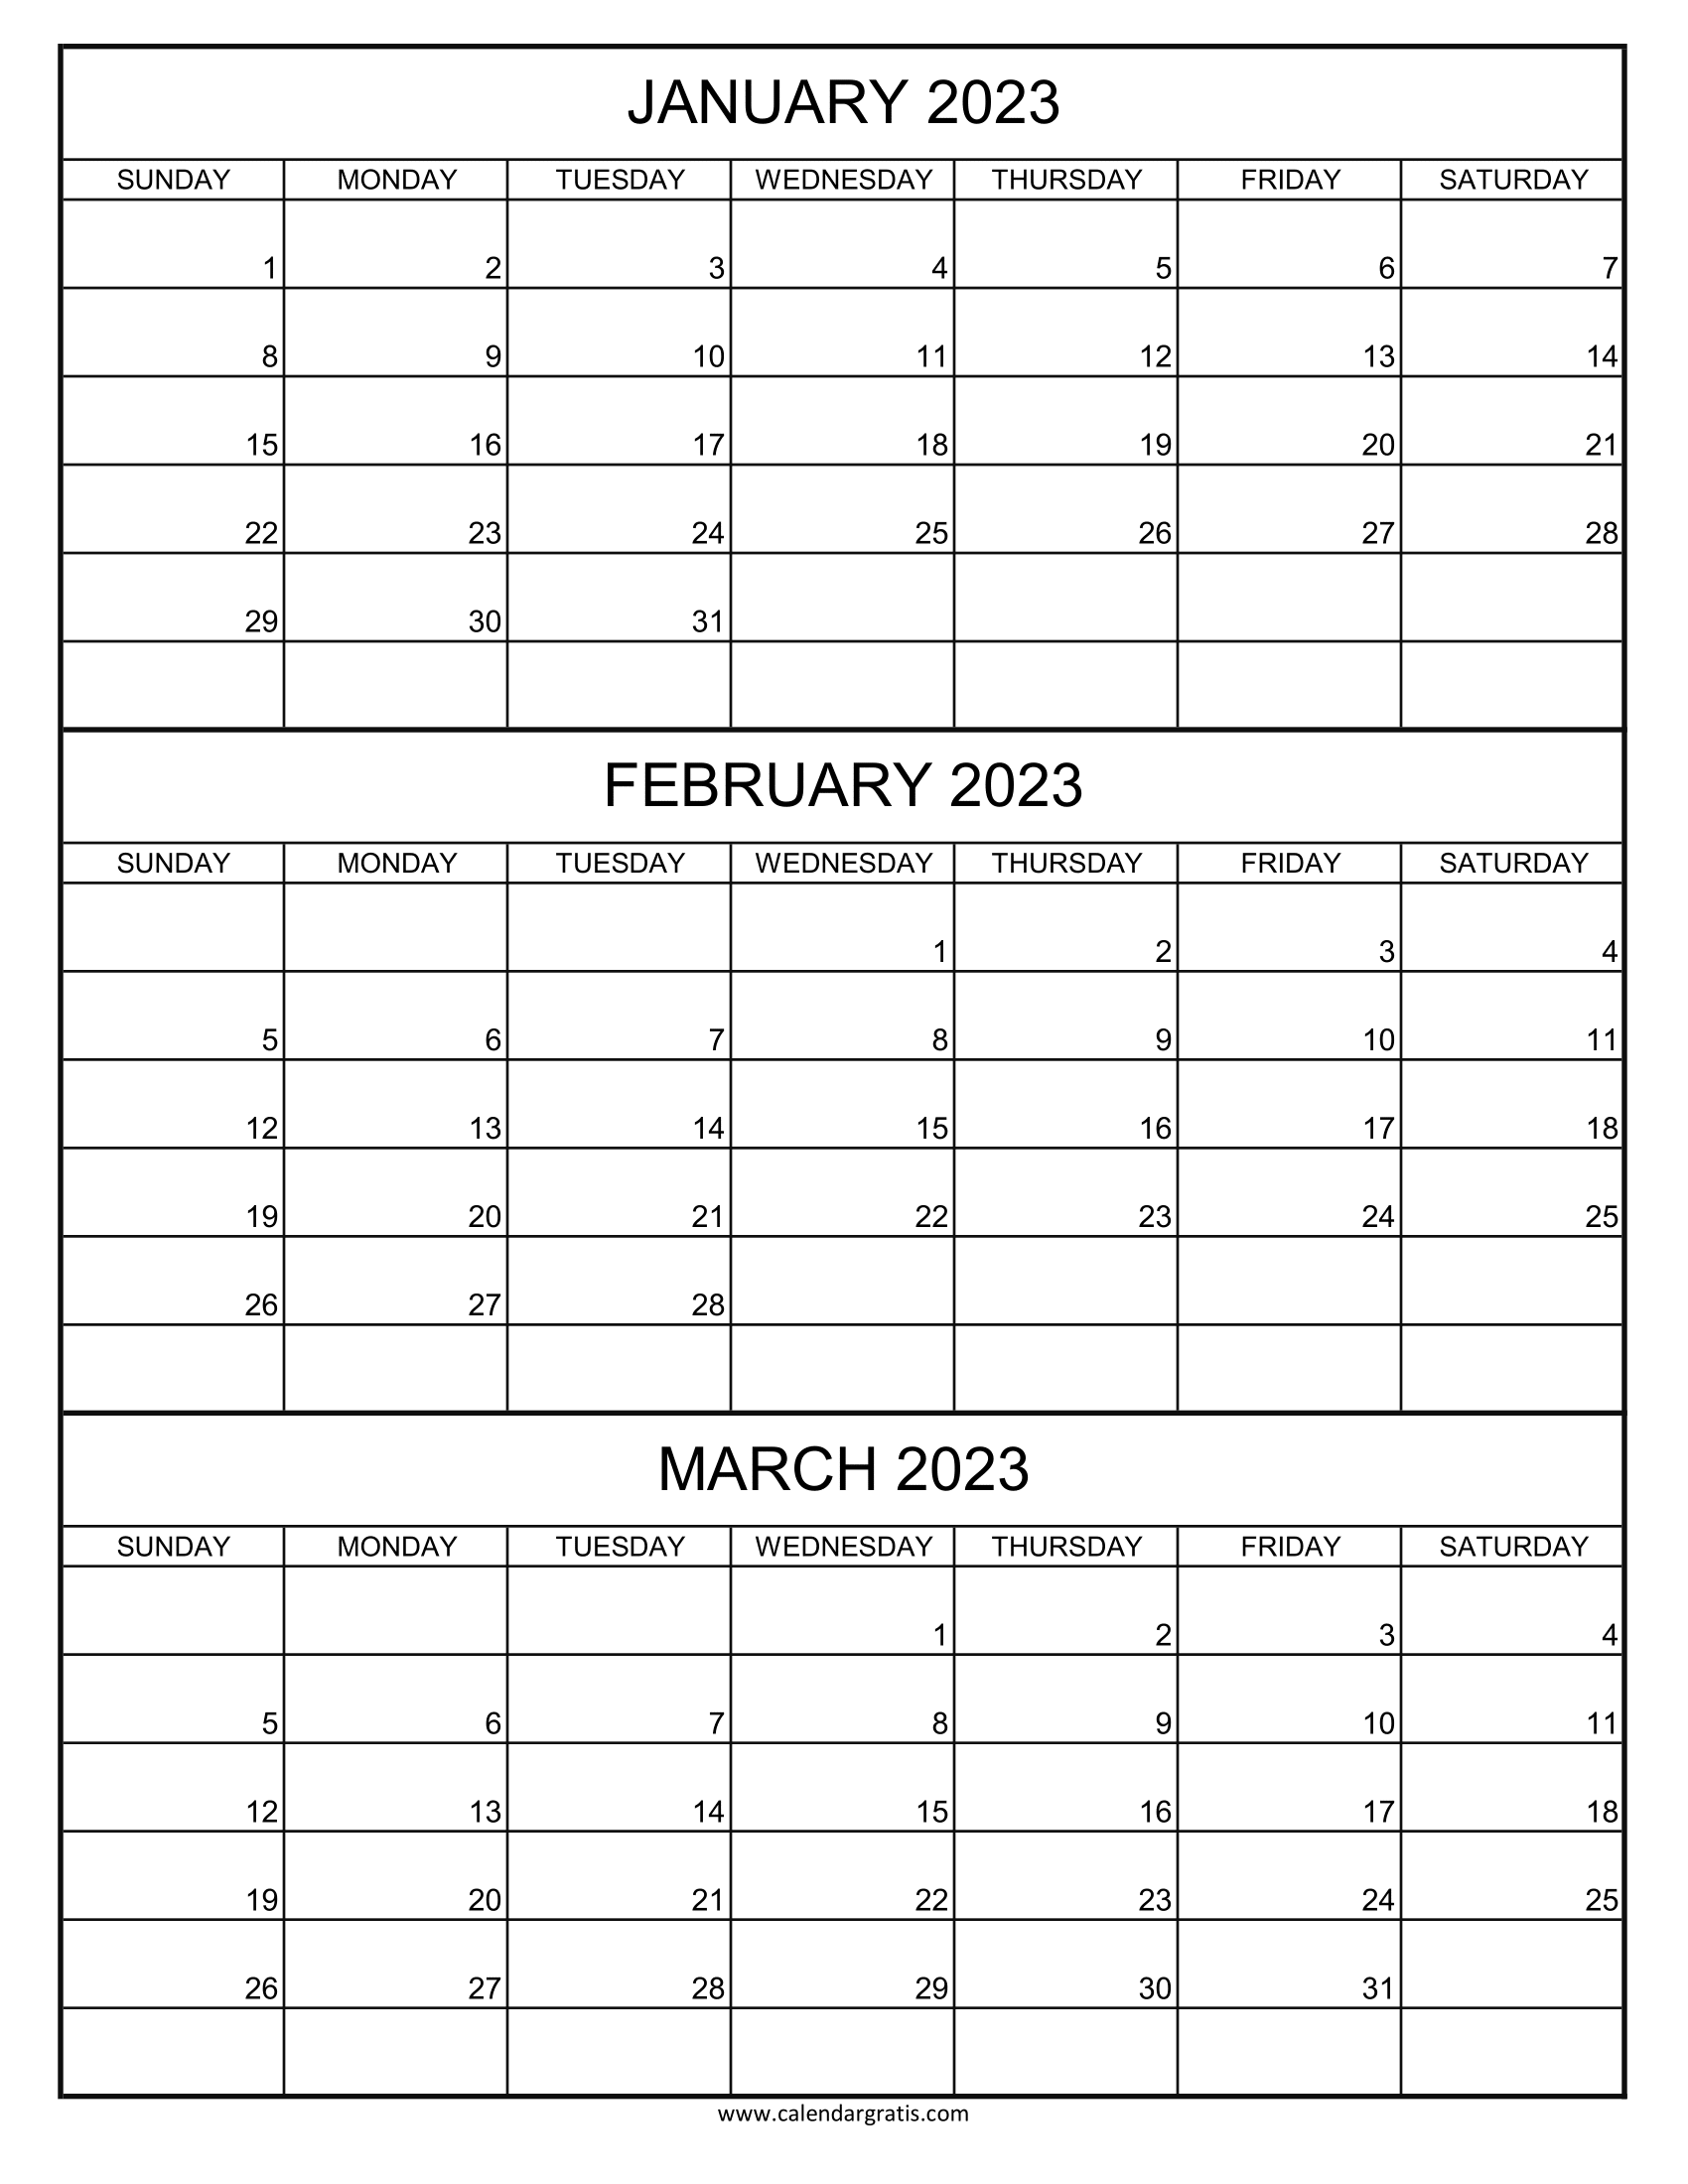 January February March 2023 Calendar Printable in Portrait Layout.